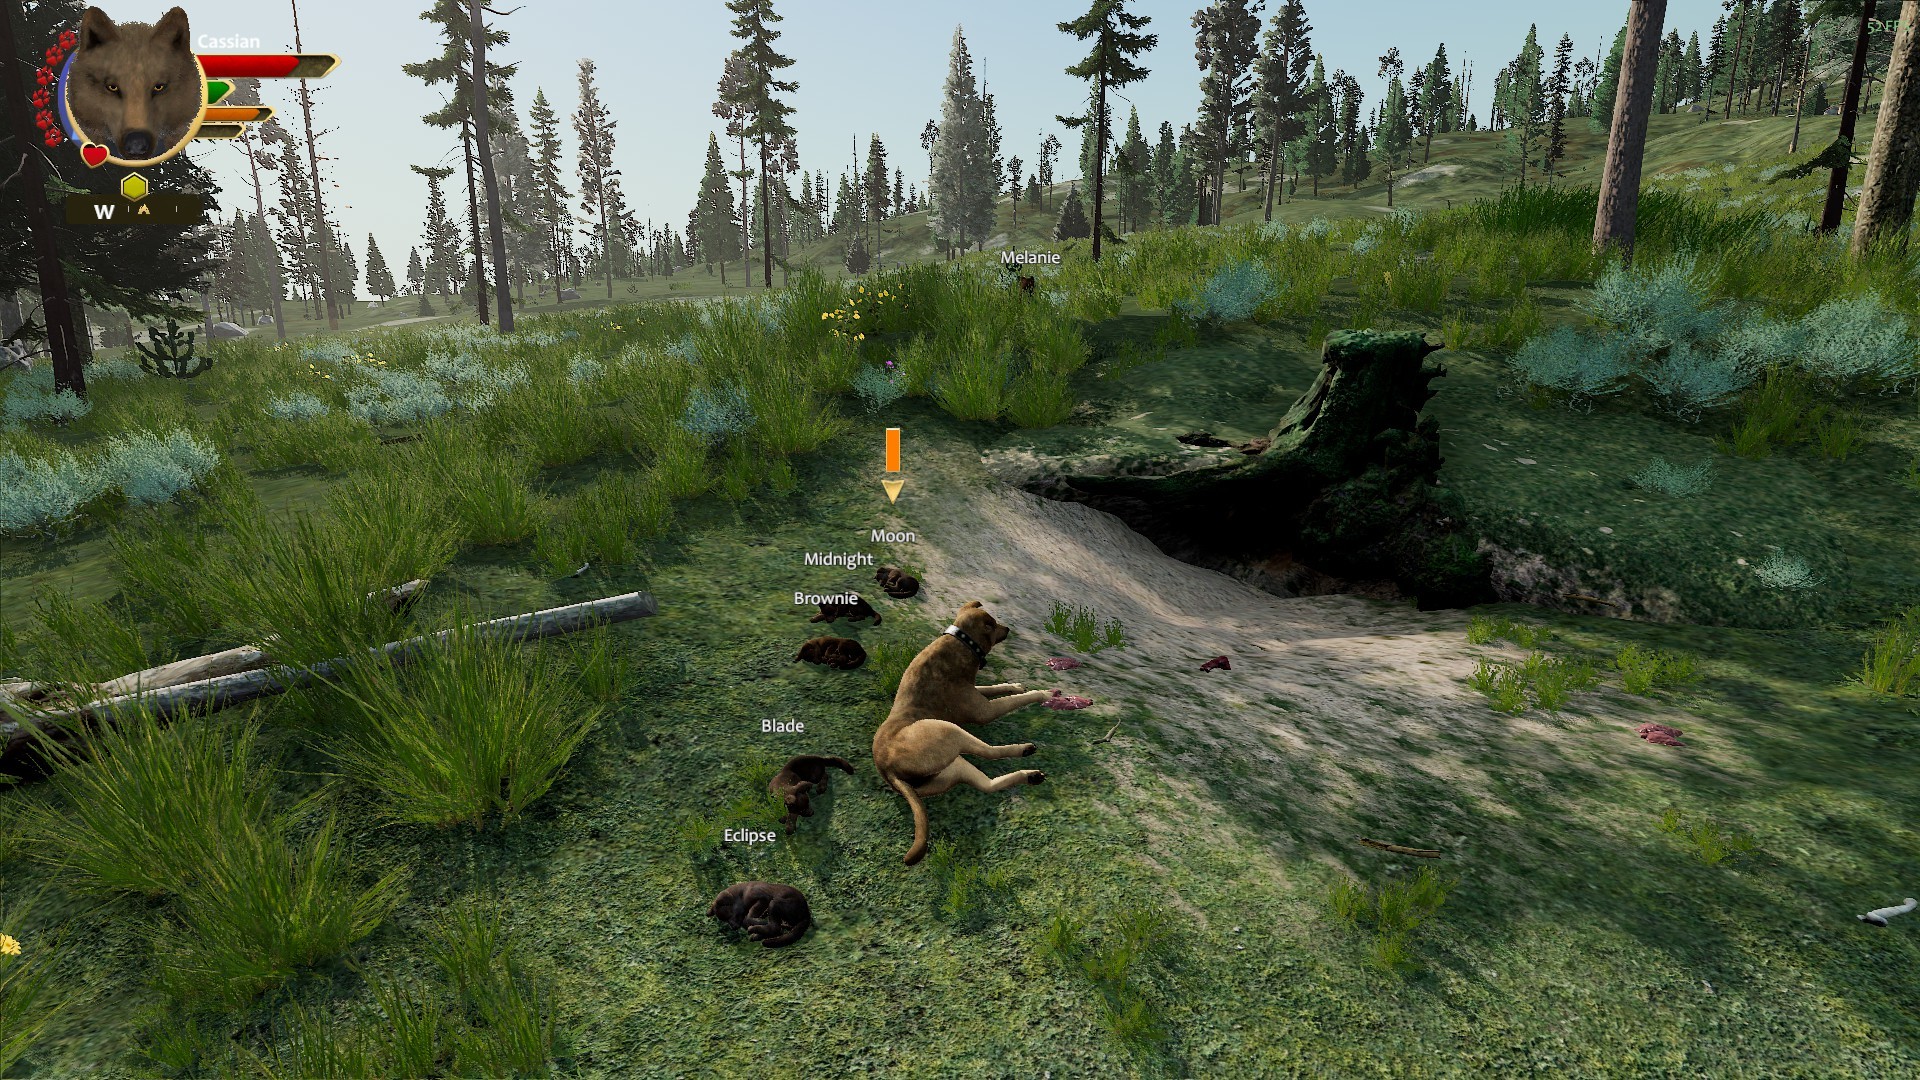 games like wolfquest for mac